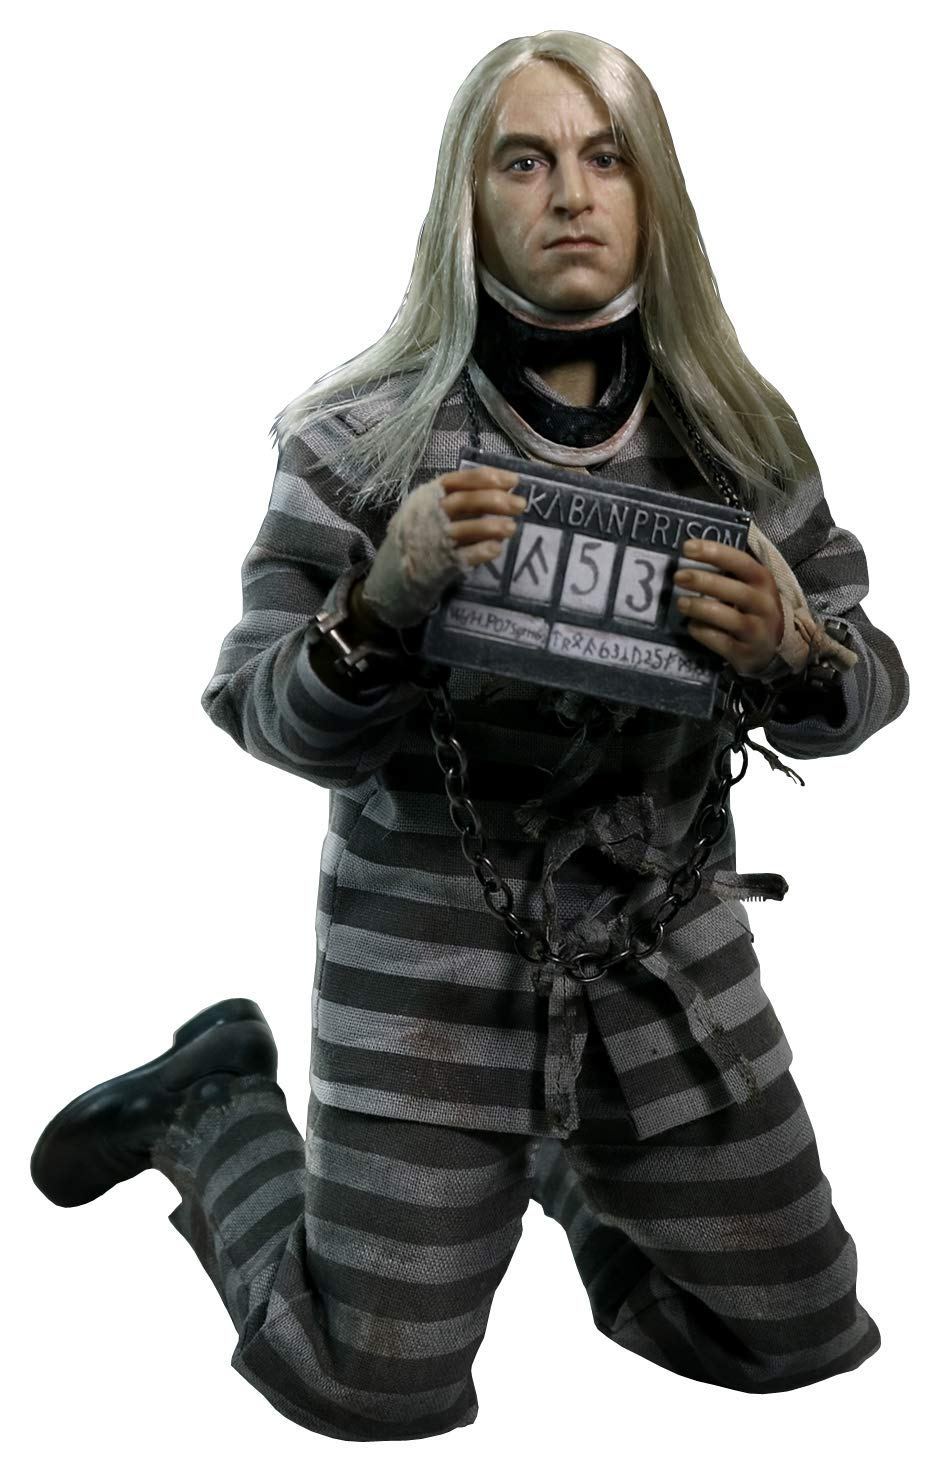 STAR ACE TOYS MY FAVORITE MOVIE SERIES HARRY POTTER AND THE ORDER OF THE PHOENIX 1/6 COLLECTIBLE ACTION FIGURE: LUCIUS MALFOY PRISONER COSTUME VER. Star Ace Toys